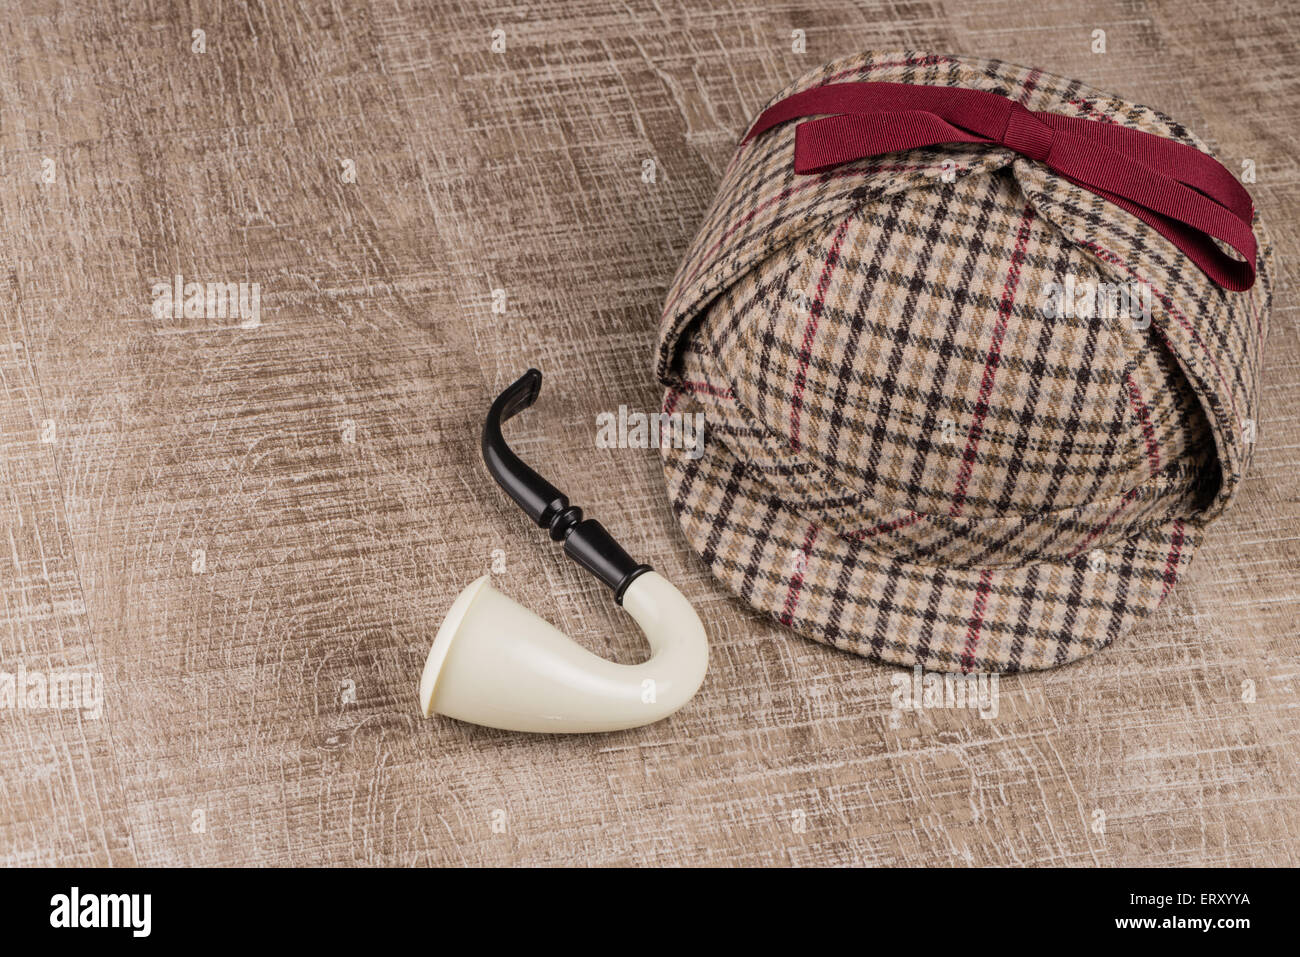 Deerstalker or Sherlock Hat and Tobacco pipe on Old Wooden table. Stock Photo